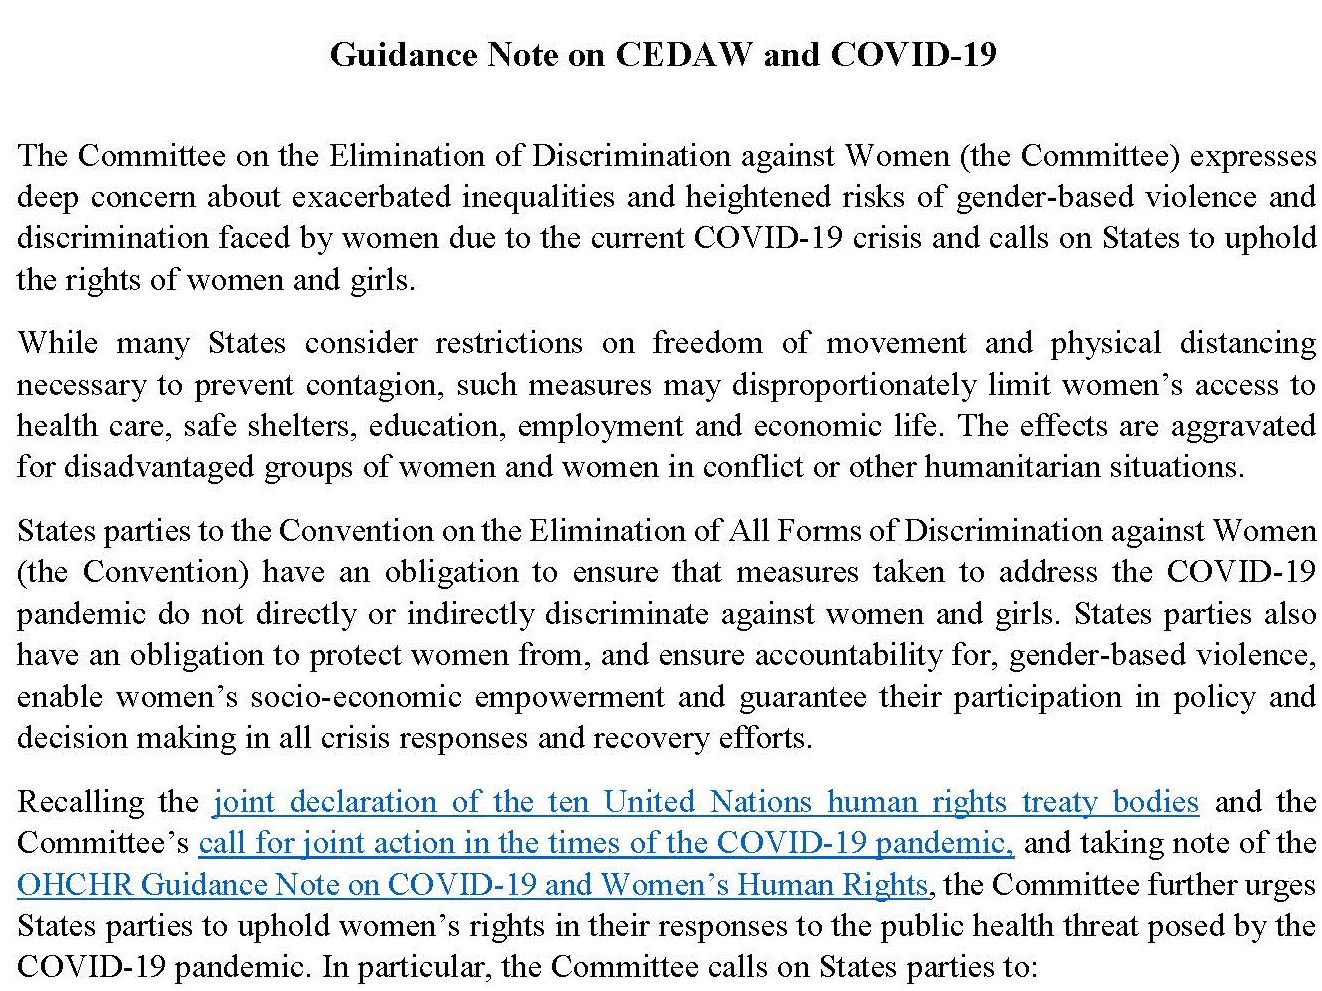 CEDAW and COVID-19 OHCHR Guidance Note 